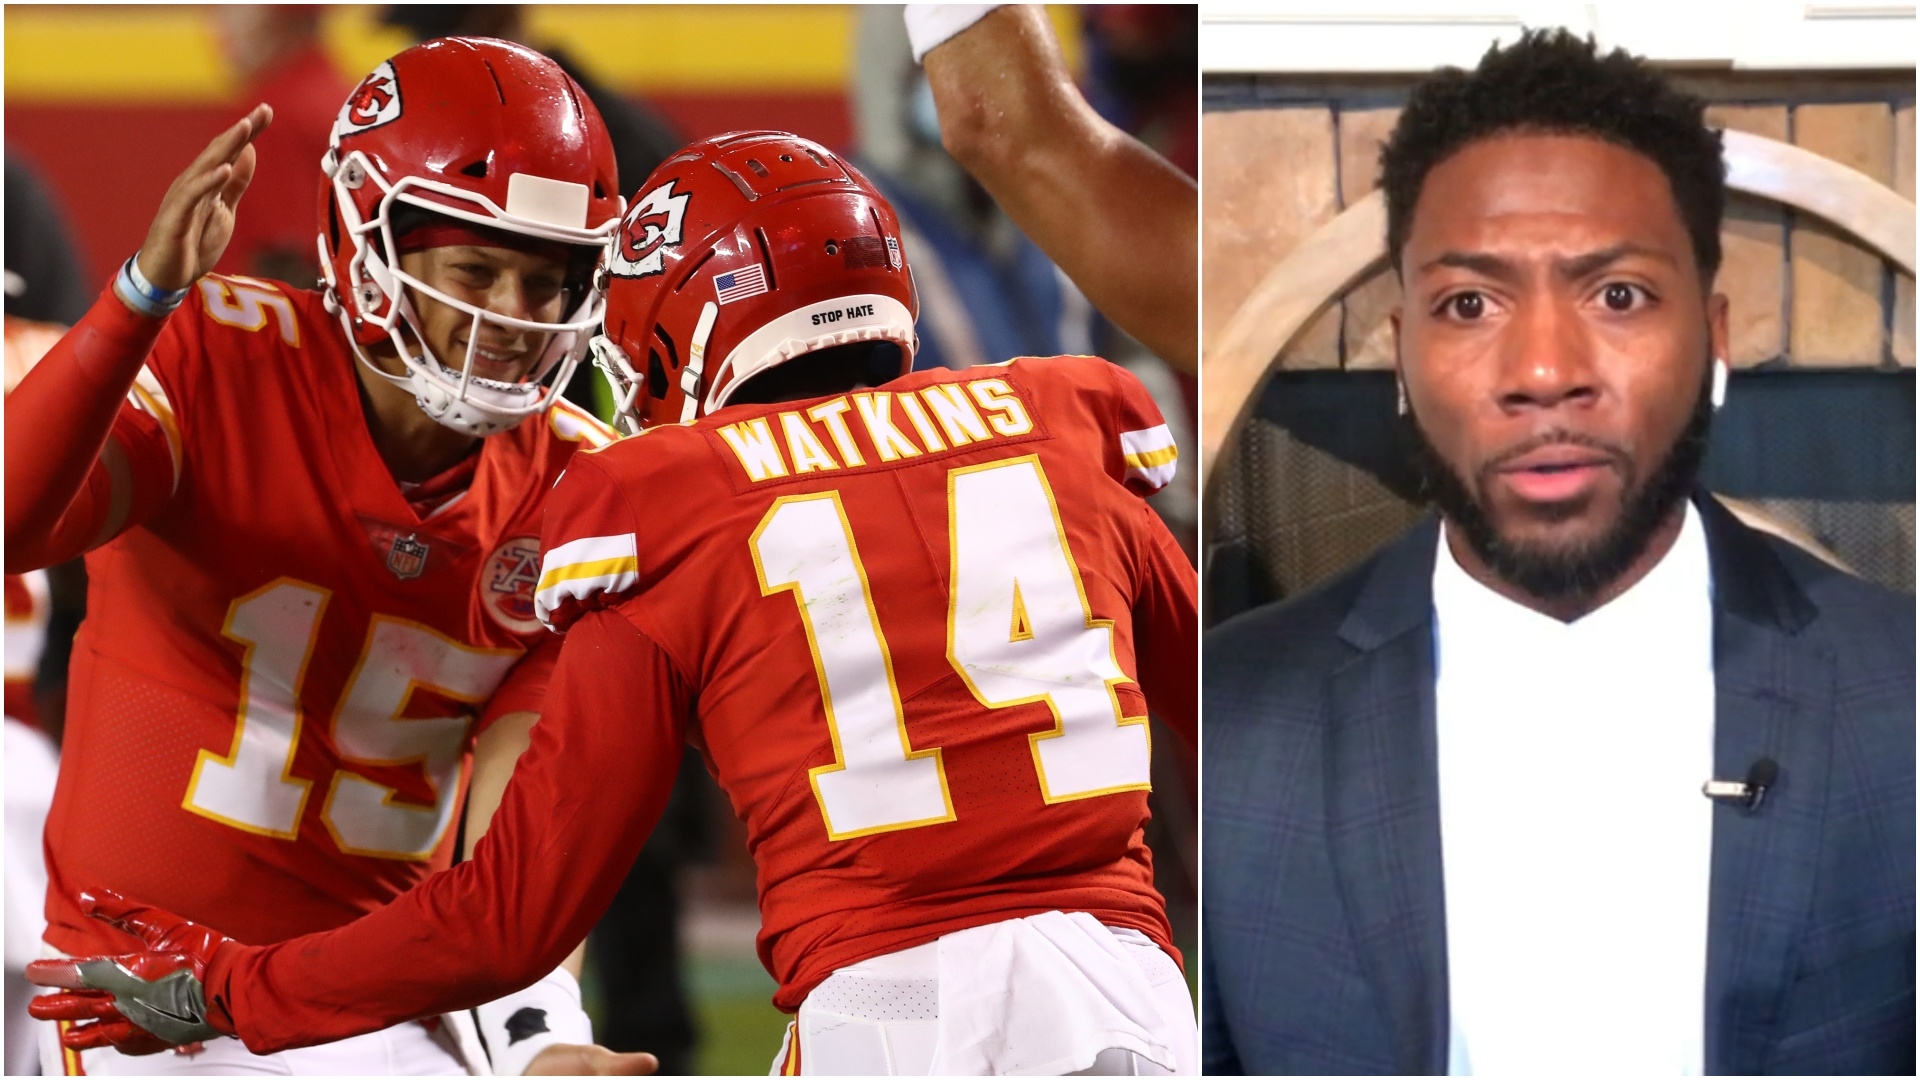 Can Mahomes lead Chiefs to undefeated season?